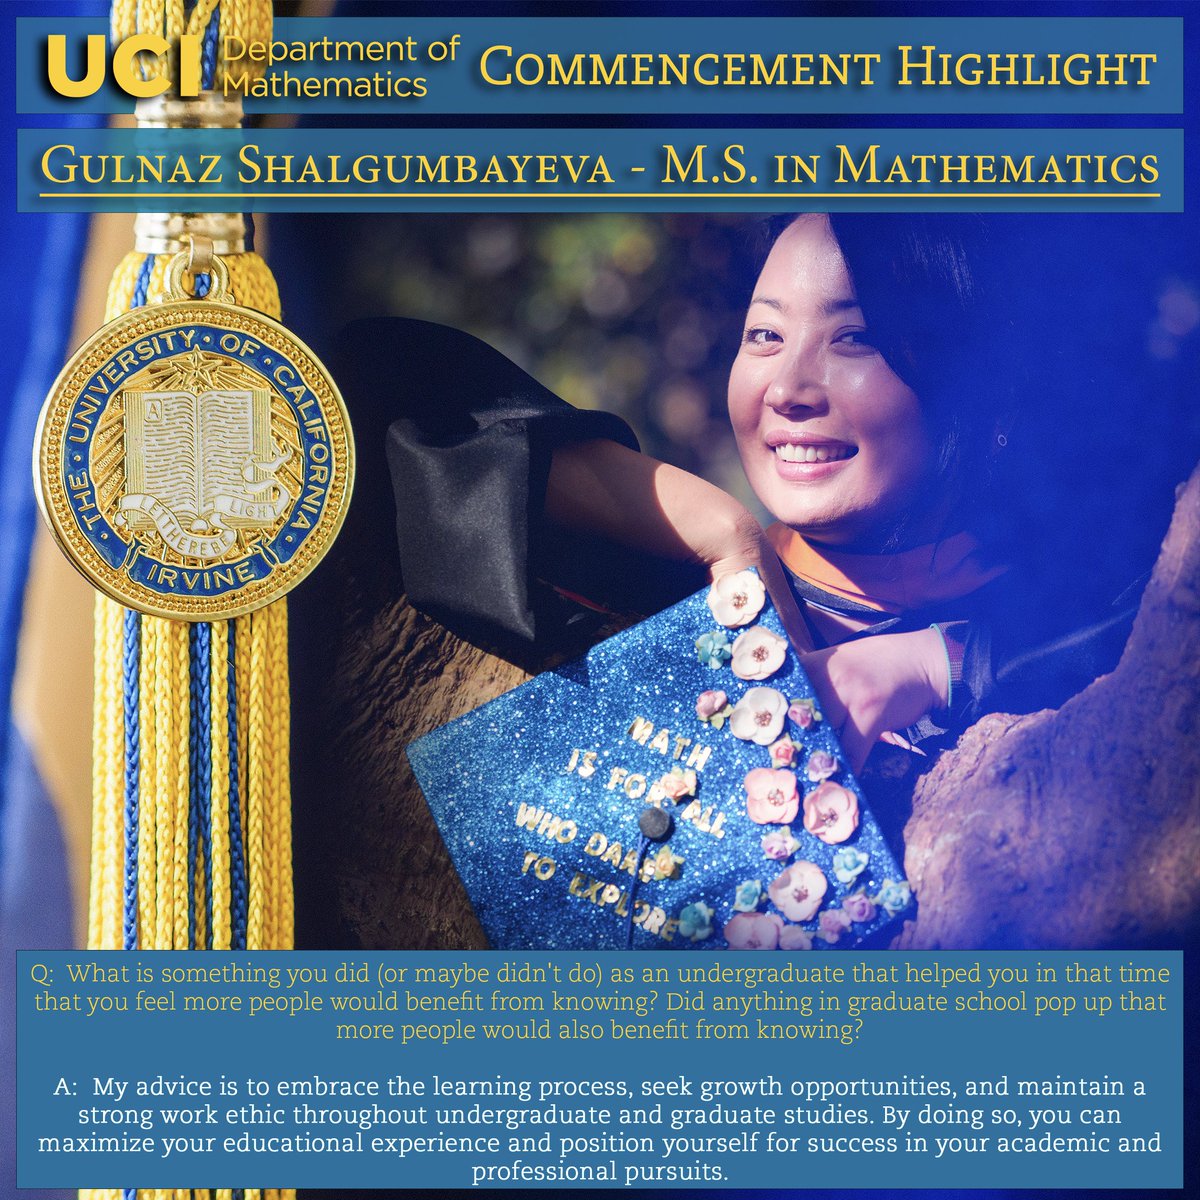 In anticipation of Commencement, we feature Gulnaz Shalgumbayeva, a graduating MS student. Learn more about her interests and tune into her words of advice for future students of mathematics. #ucimath #ucicommencement #commencement #graduation #ucigraduation